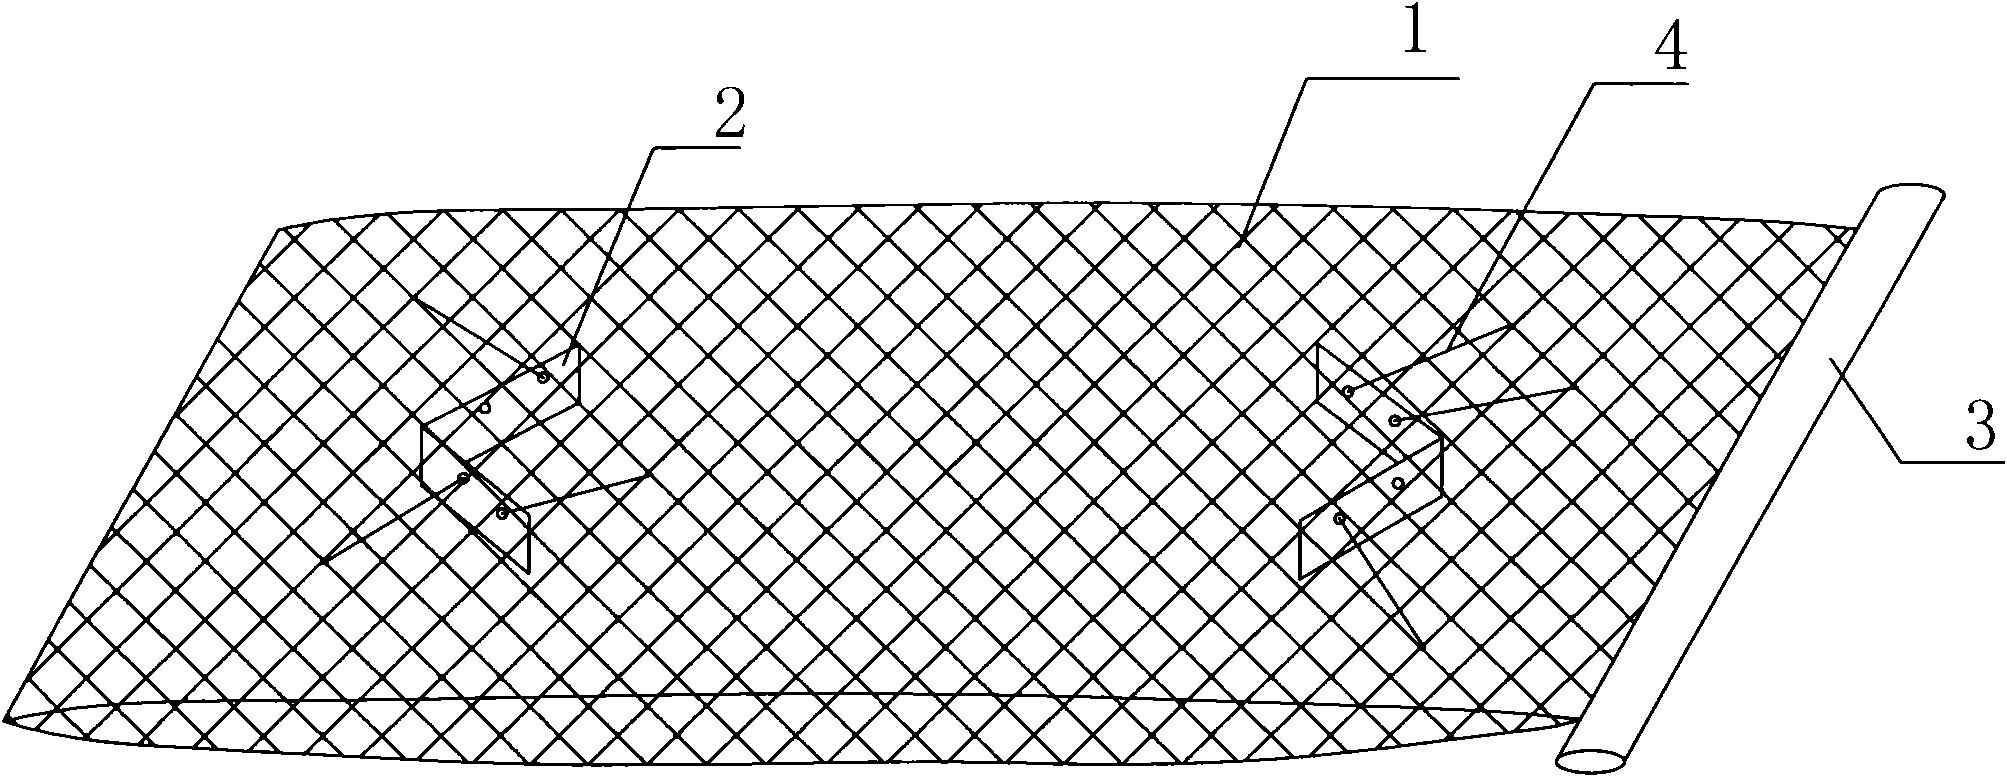 Seabed cage-breeding device for comb shells